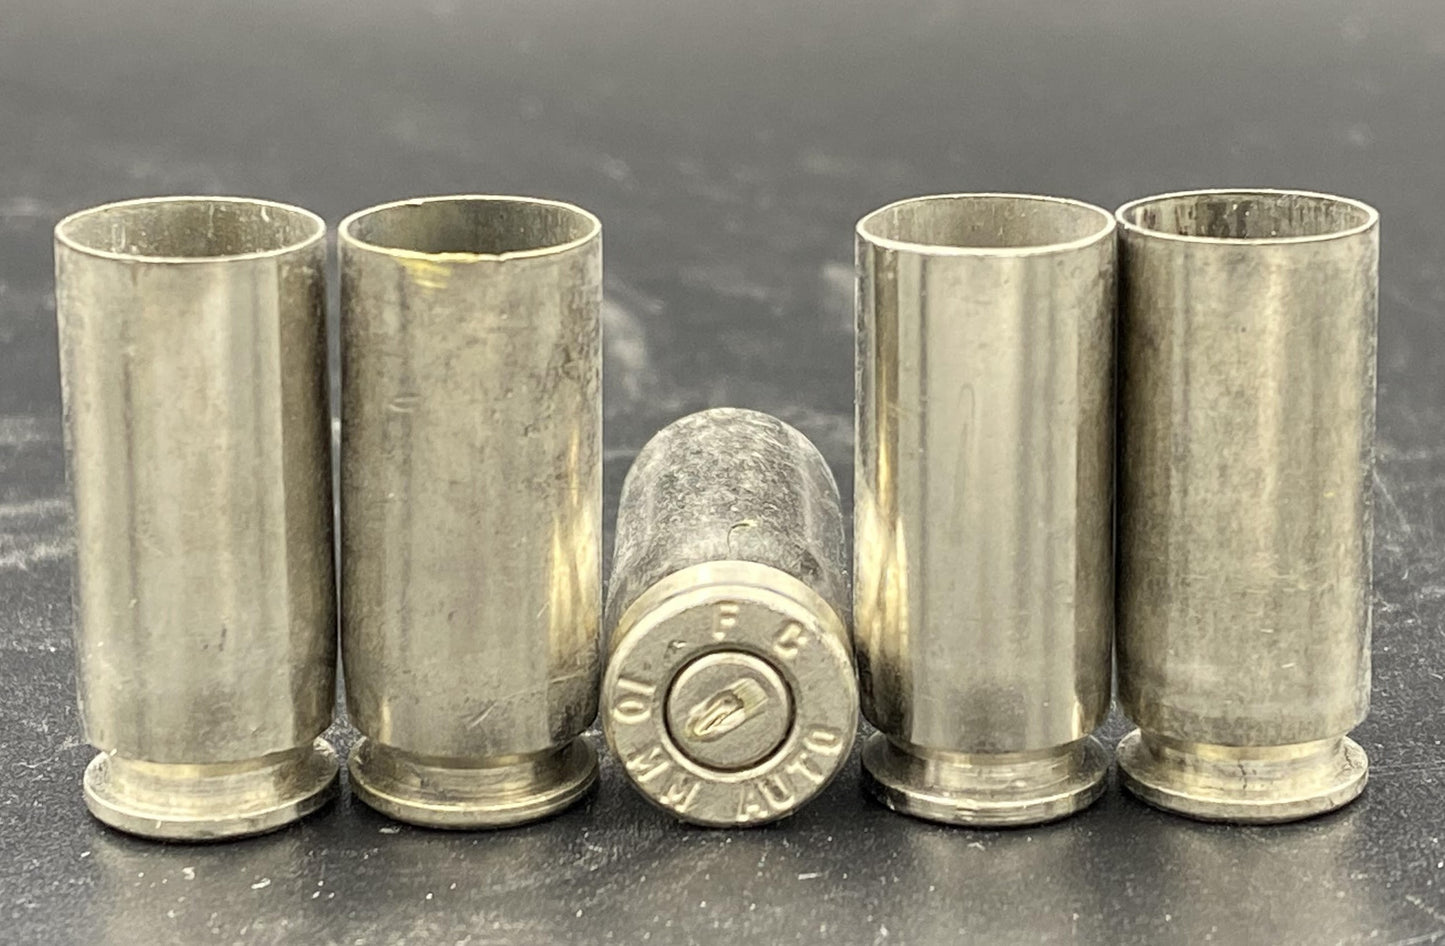 10mm once fired pistol nickel. Hand sorted from reputable indoor/military ranges for reloading. Reliable spent casings for precision shooting.